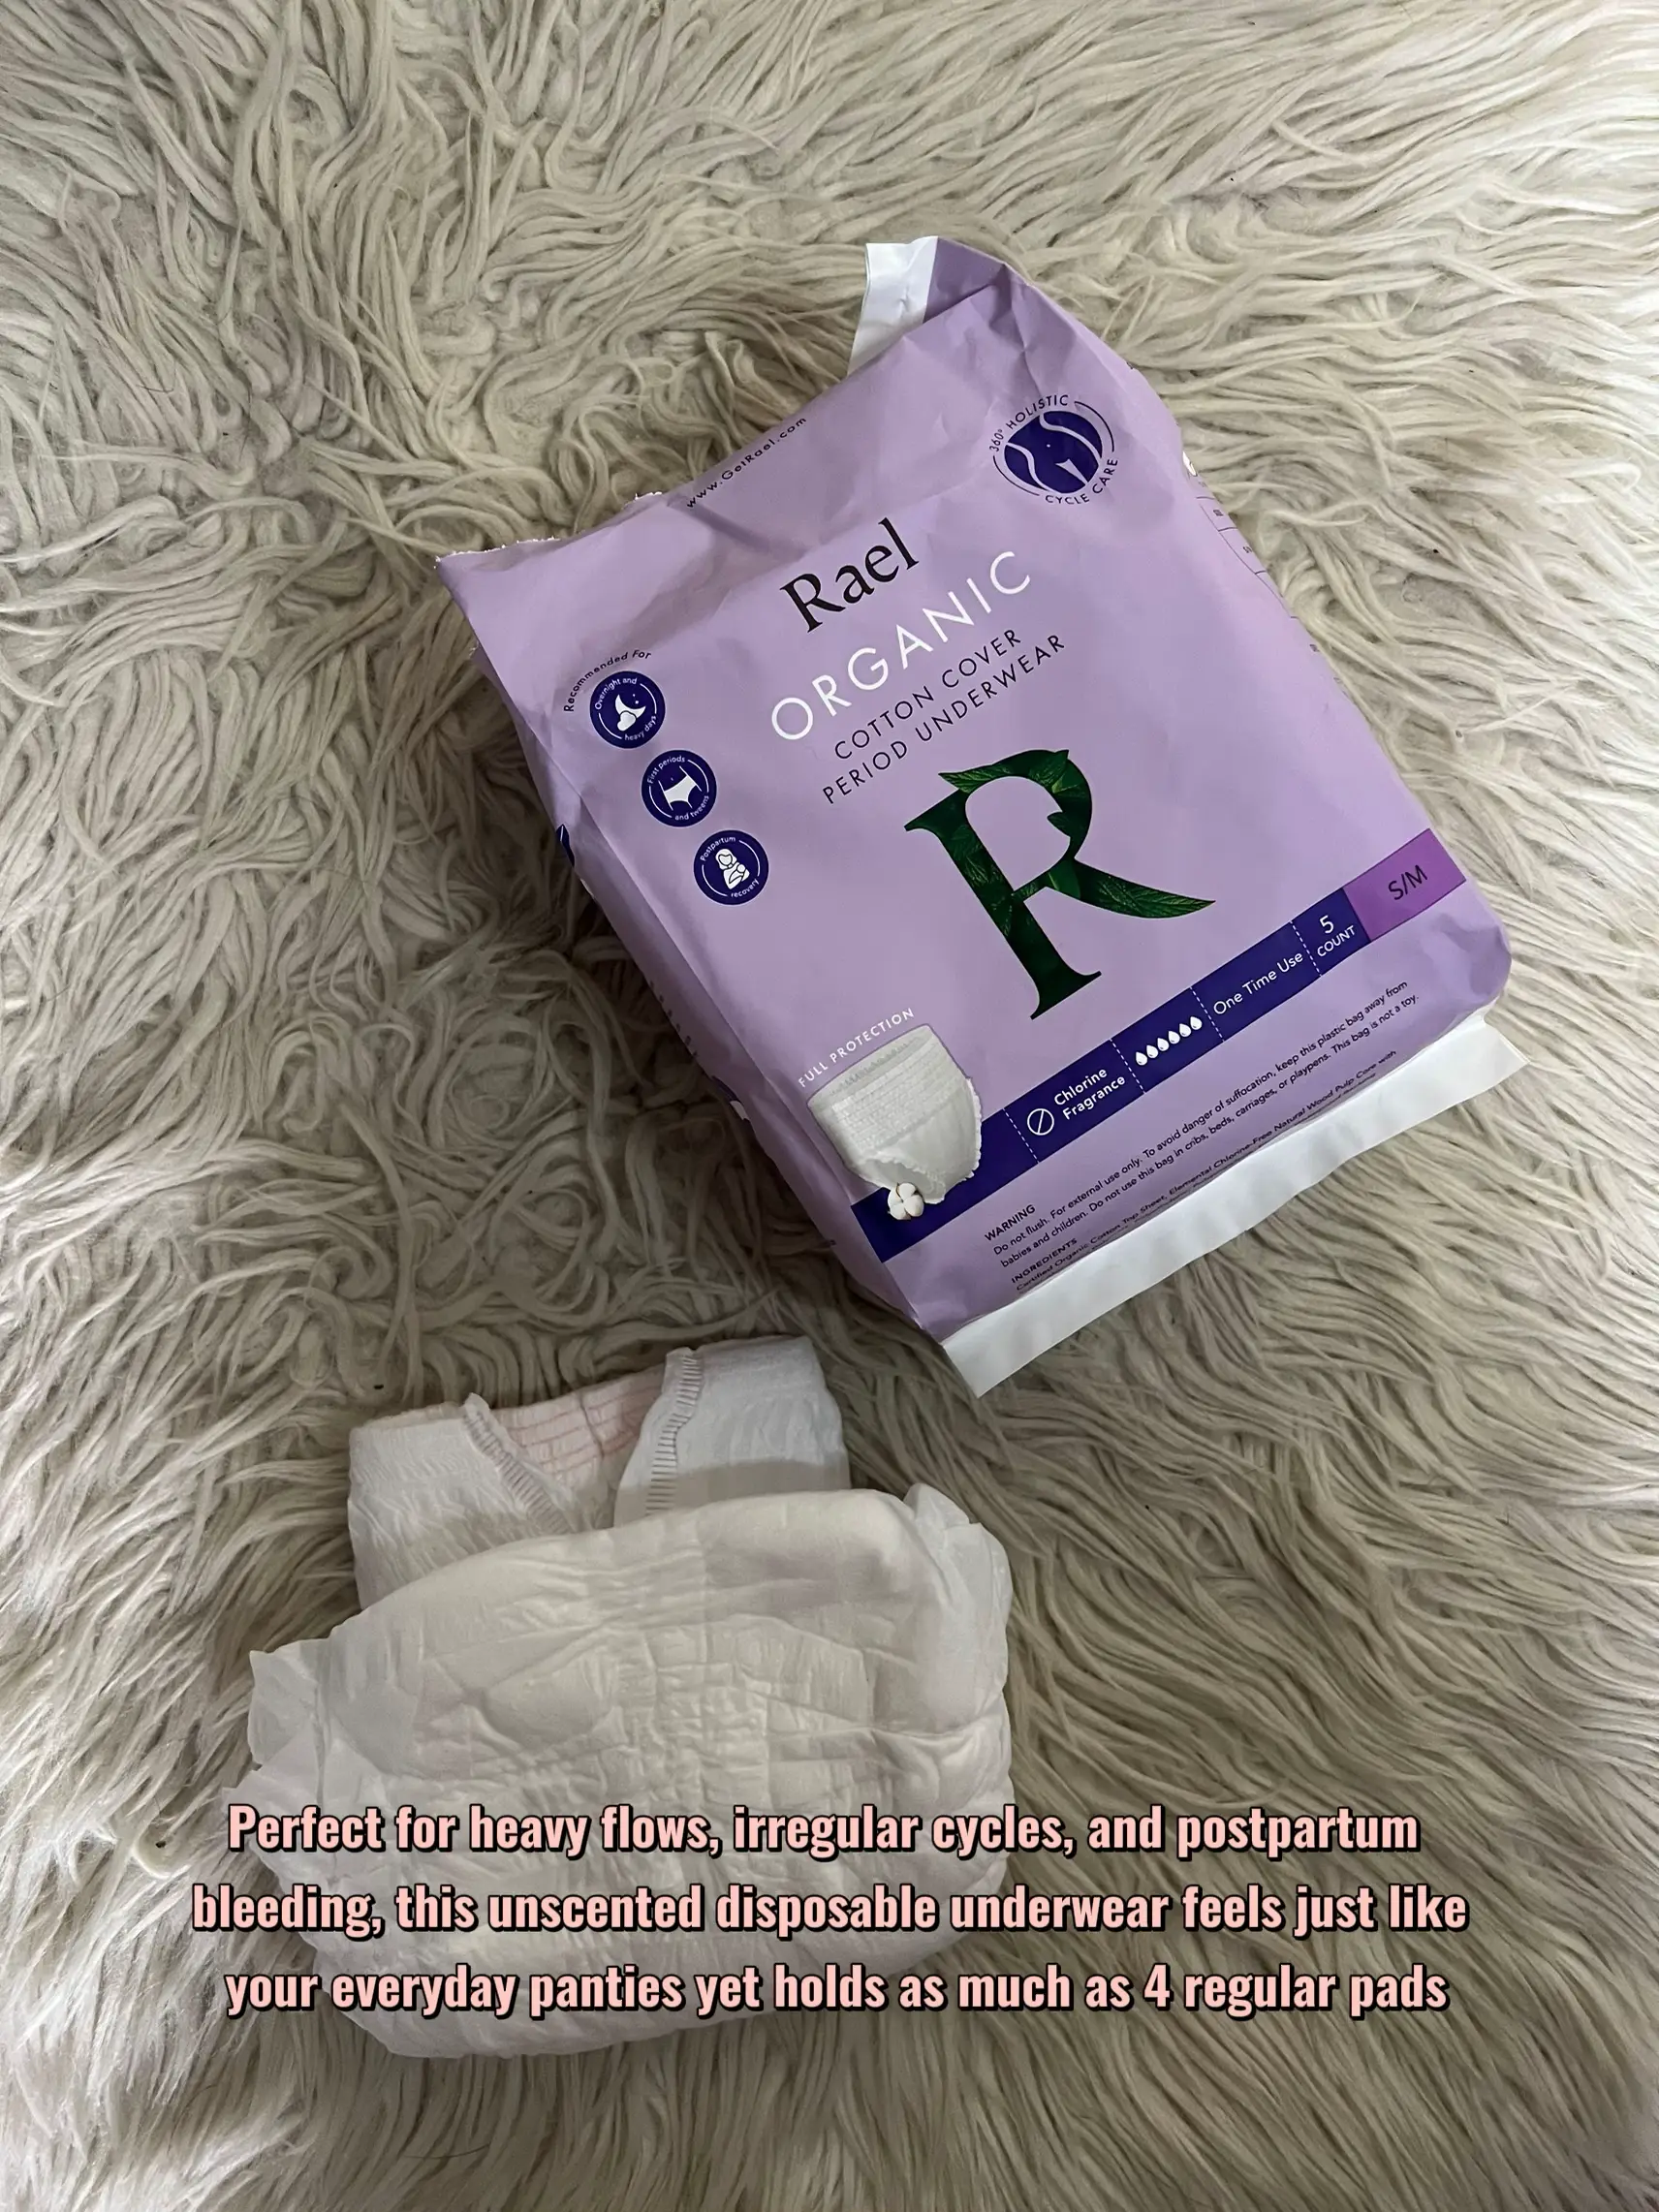 How to Prevent Period Leak with Pads - Lemon8 Search